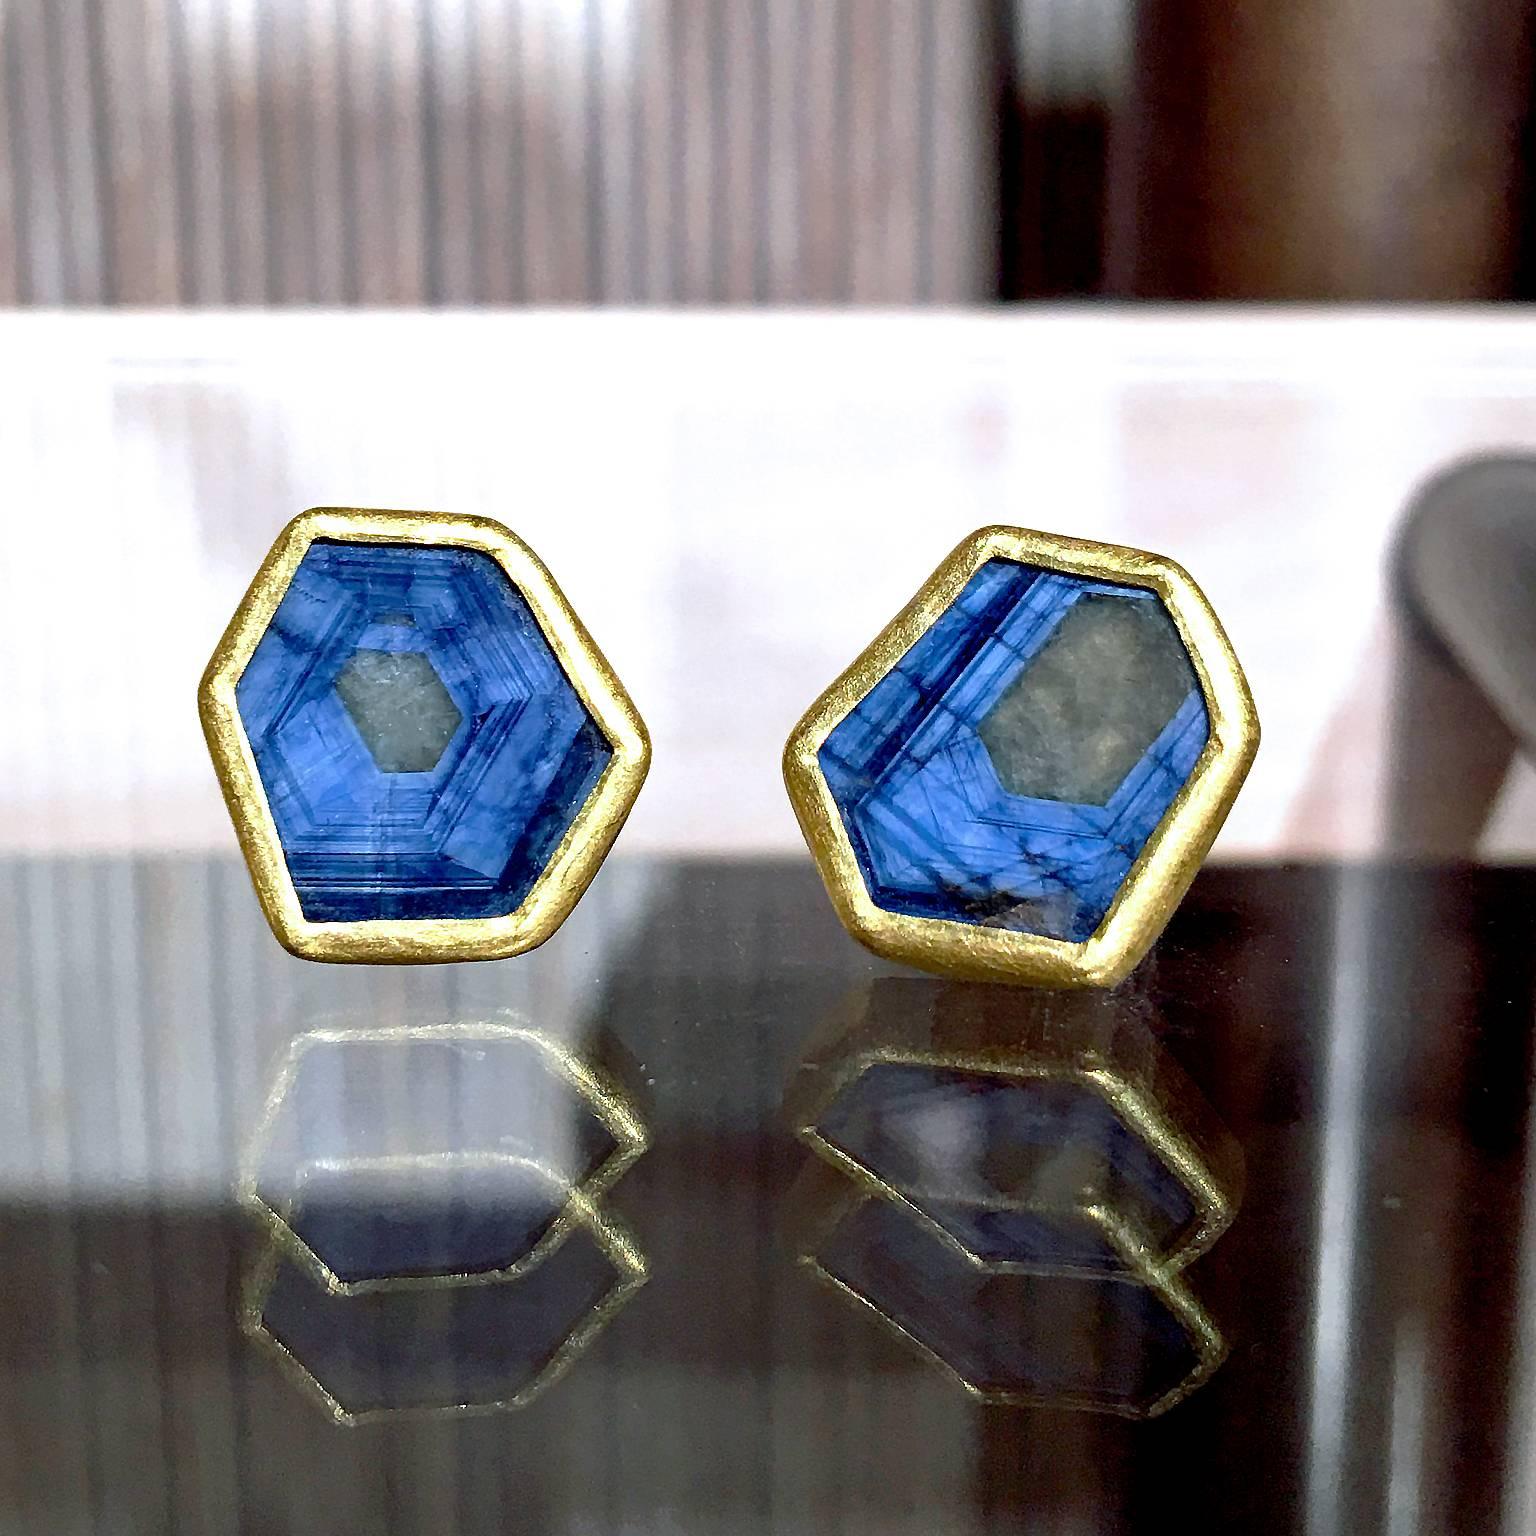 One of a Kind Studs handmade by jewelry designer Petra Class in matte-finished 22k yellow gold with two blue sapphire slices that have a unique, understated glow. On 18k yellow gold posts.

Stamped and Hallmarked 18k / 22k / PC